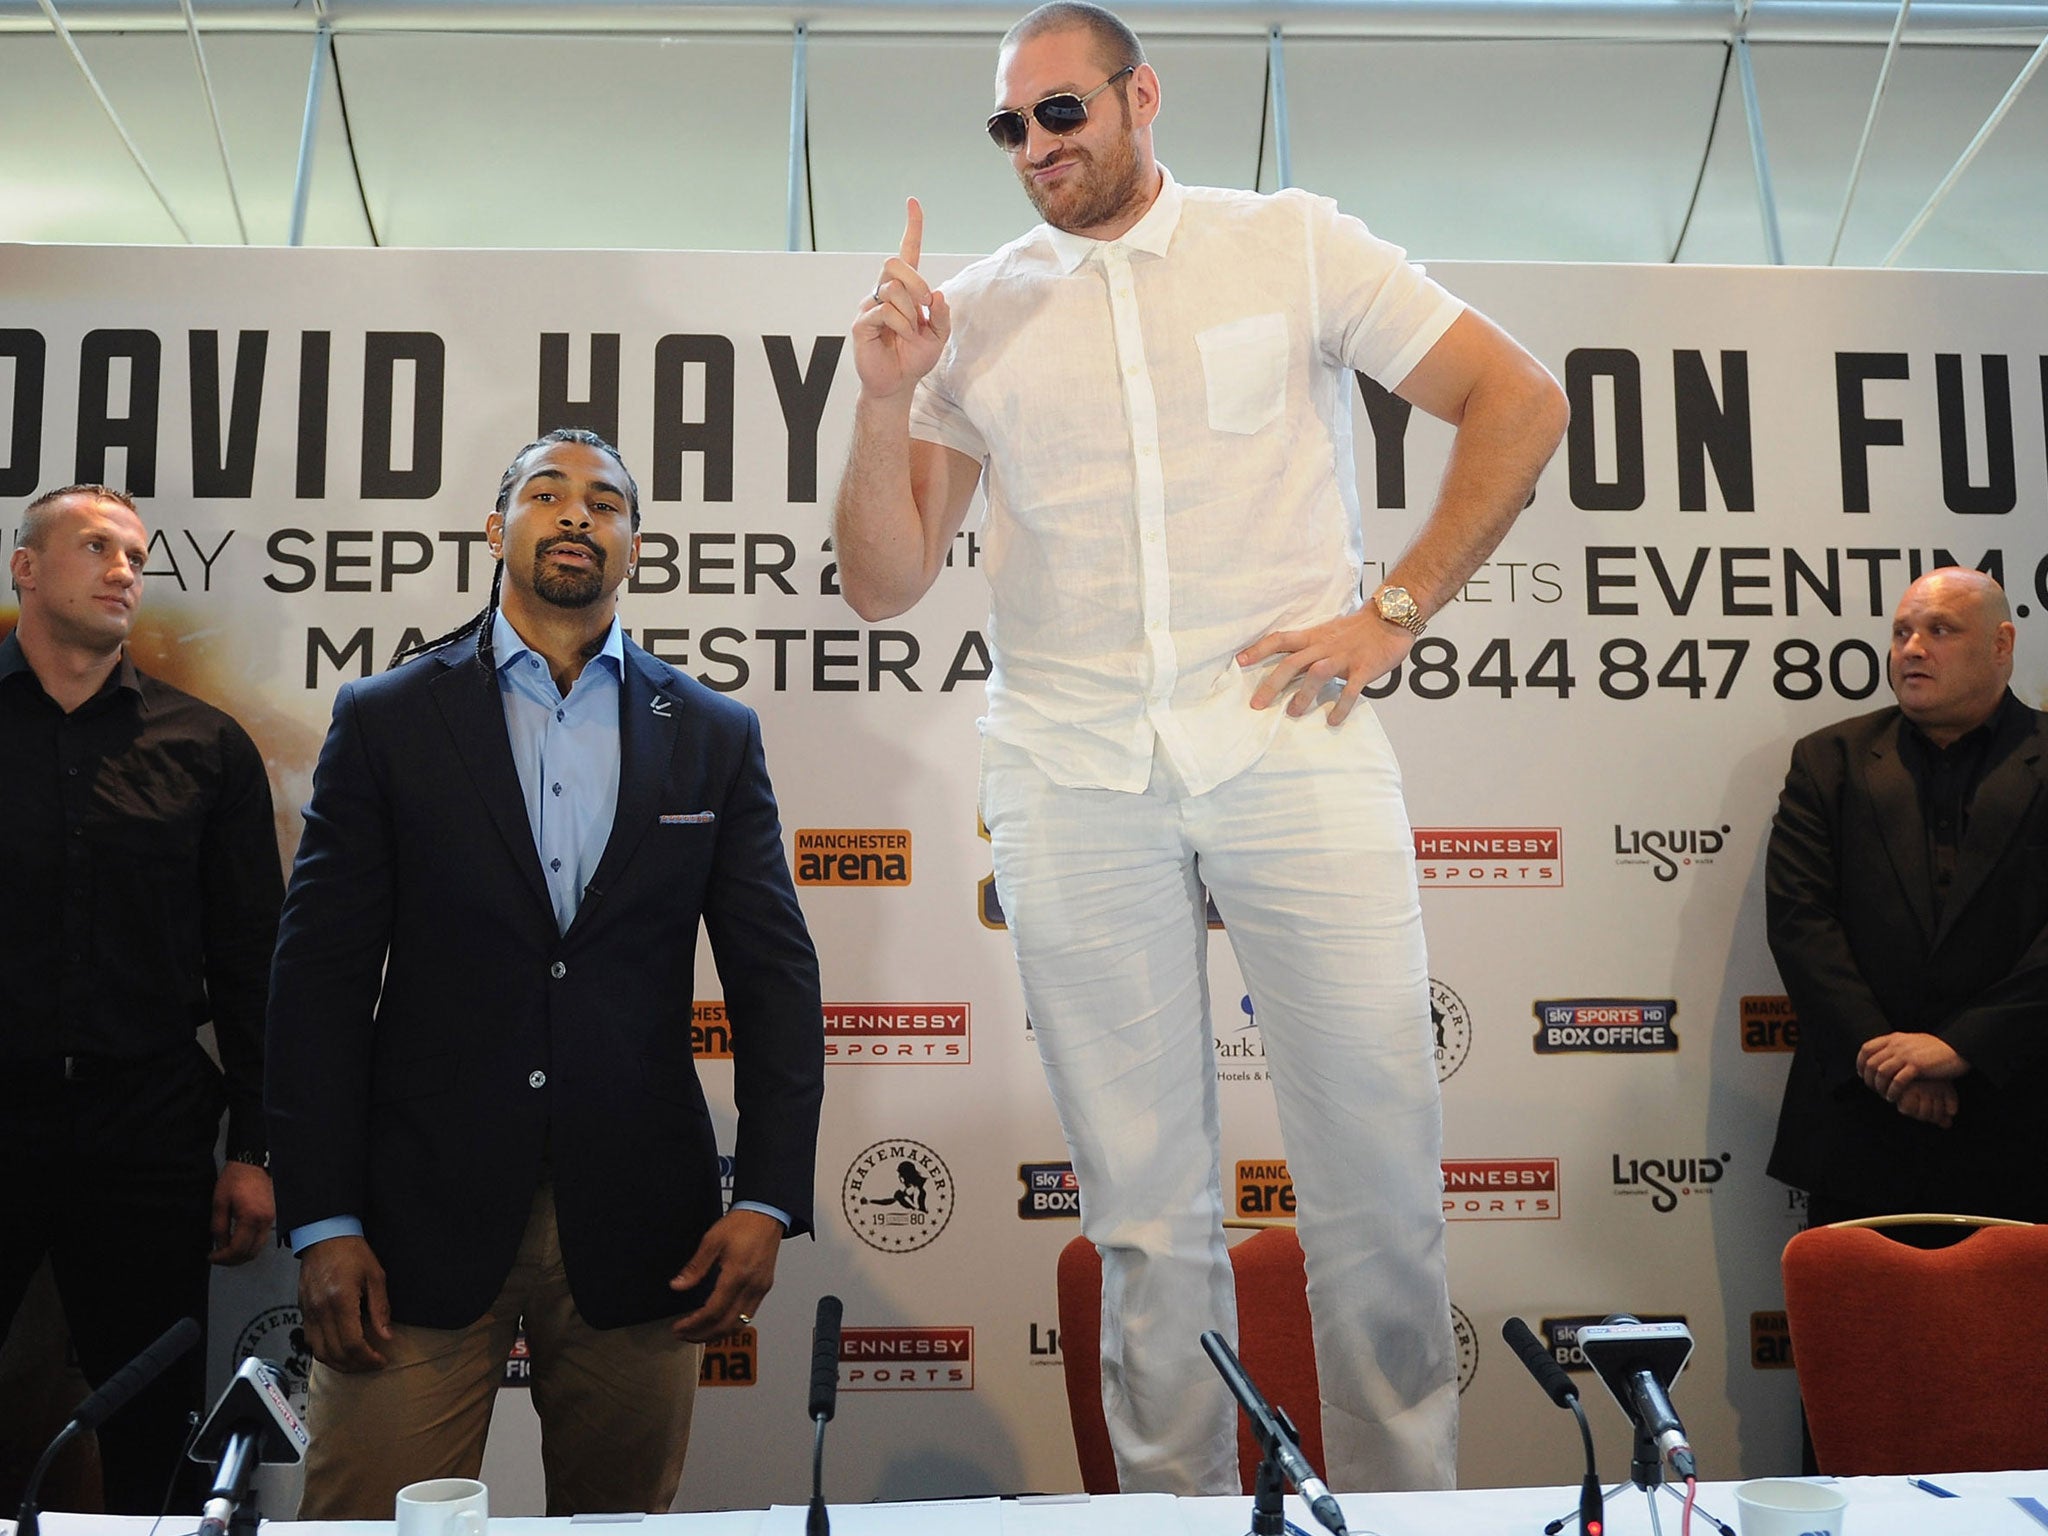 Tyson Fury stands on a chair to make a point during his press conference with David Haye